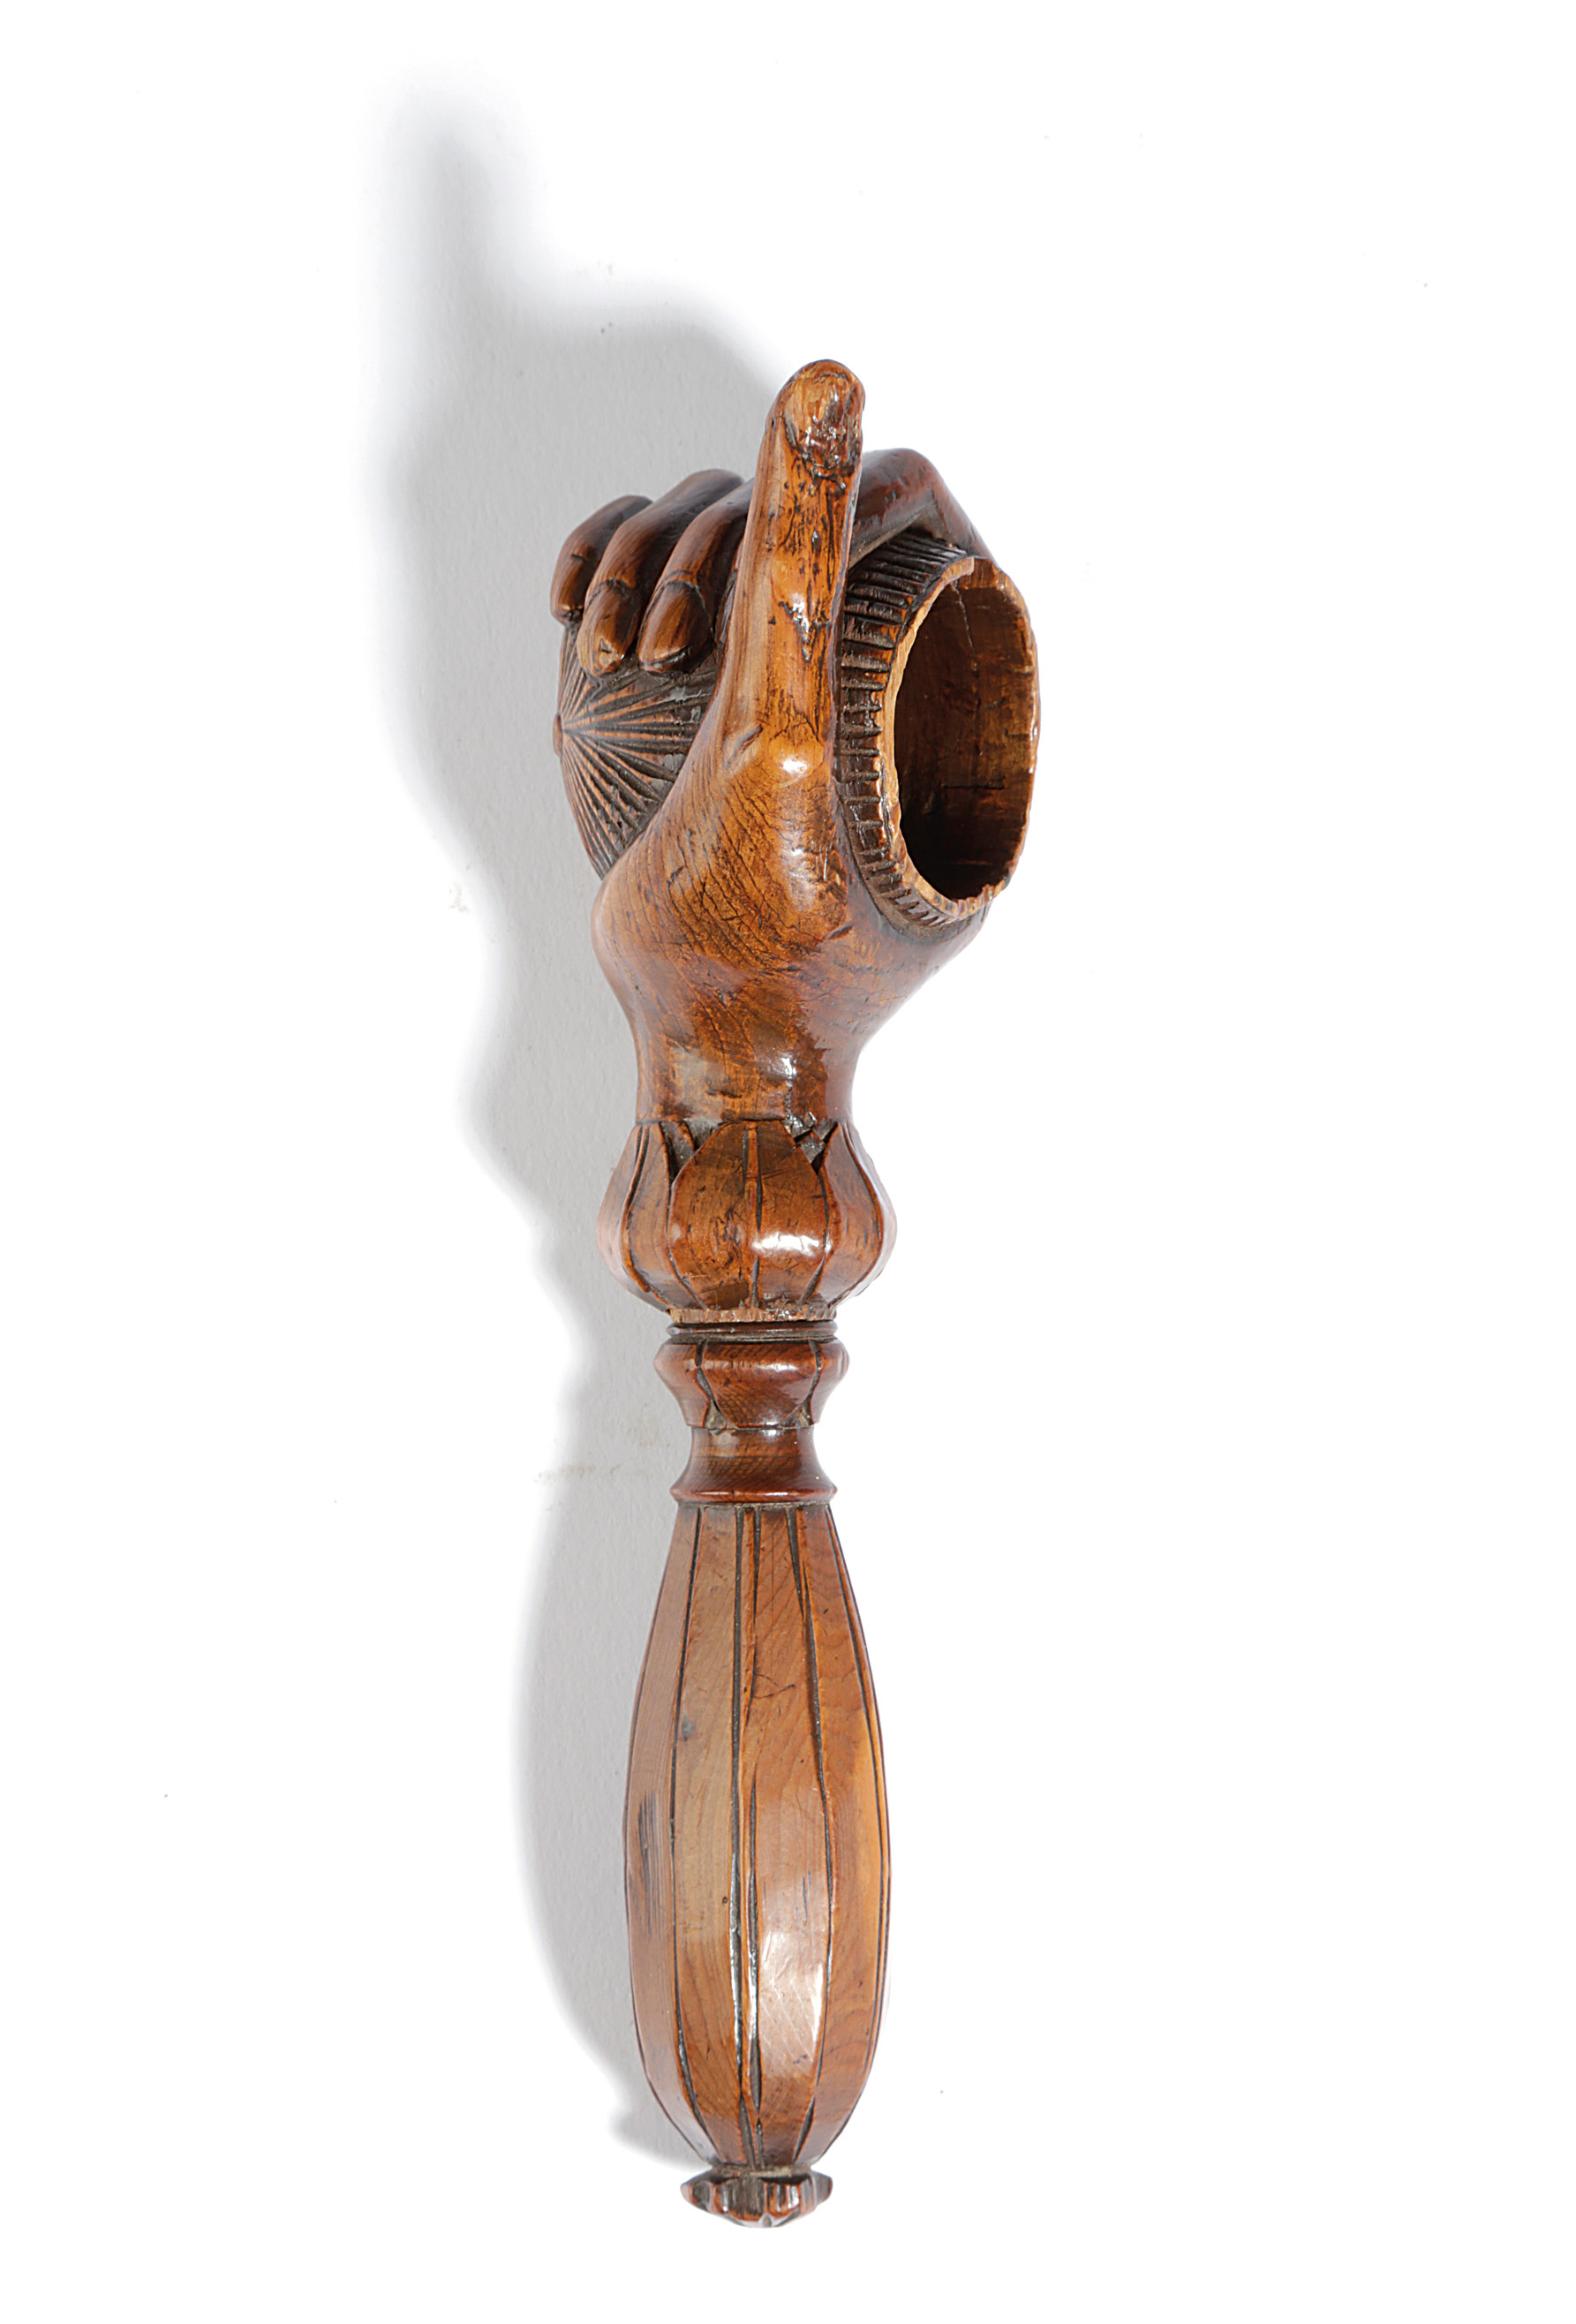 A SWISS TREEN NOVELTY NUTCRACKER 19TH CENTURY in the form of a hand holding a walnut, with a screw